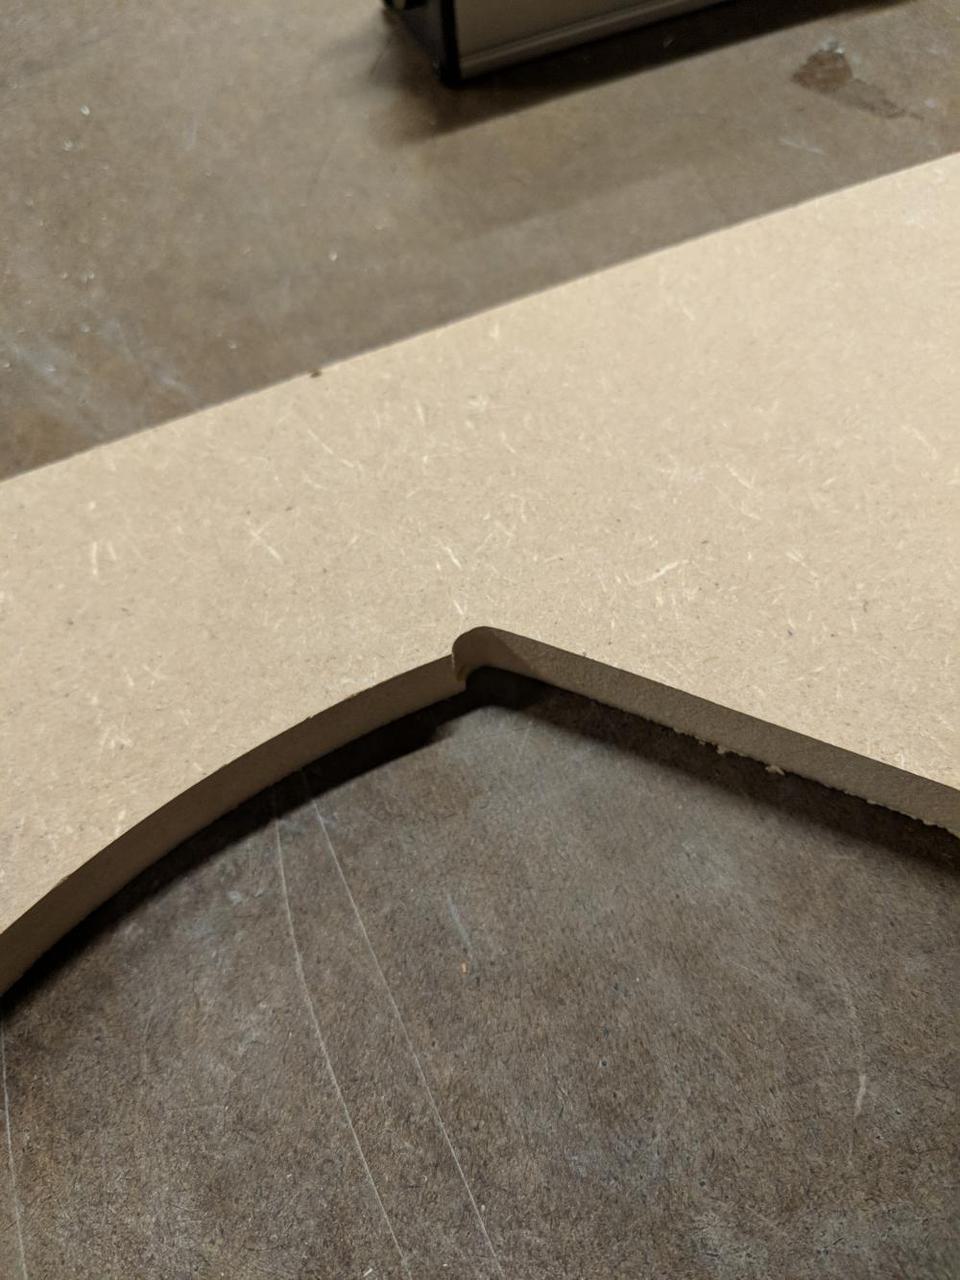 edge of piece of wood with sloppy corner, with two cut lines partially overlapped.